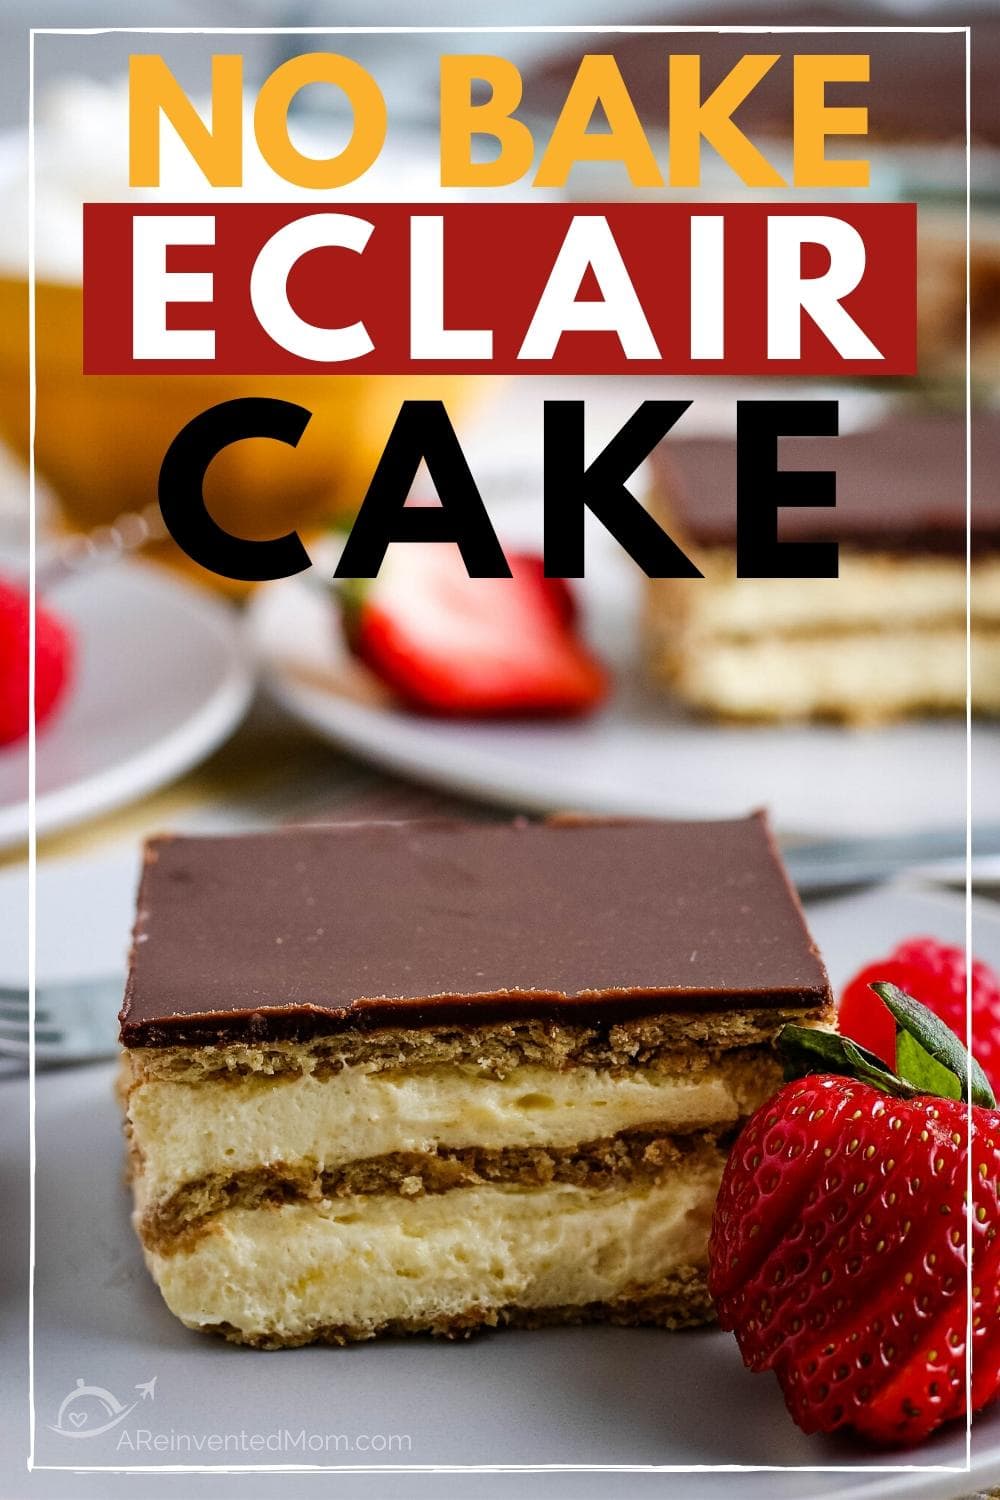 Close up of a slice of chocolate eclair cake next to a sliced strawberry for a garnish with text overlay.